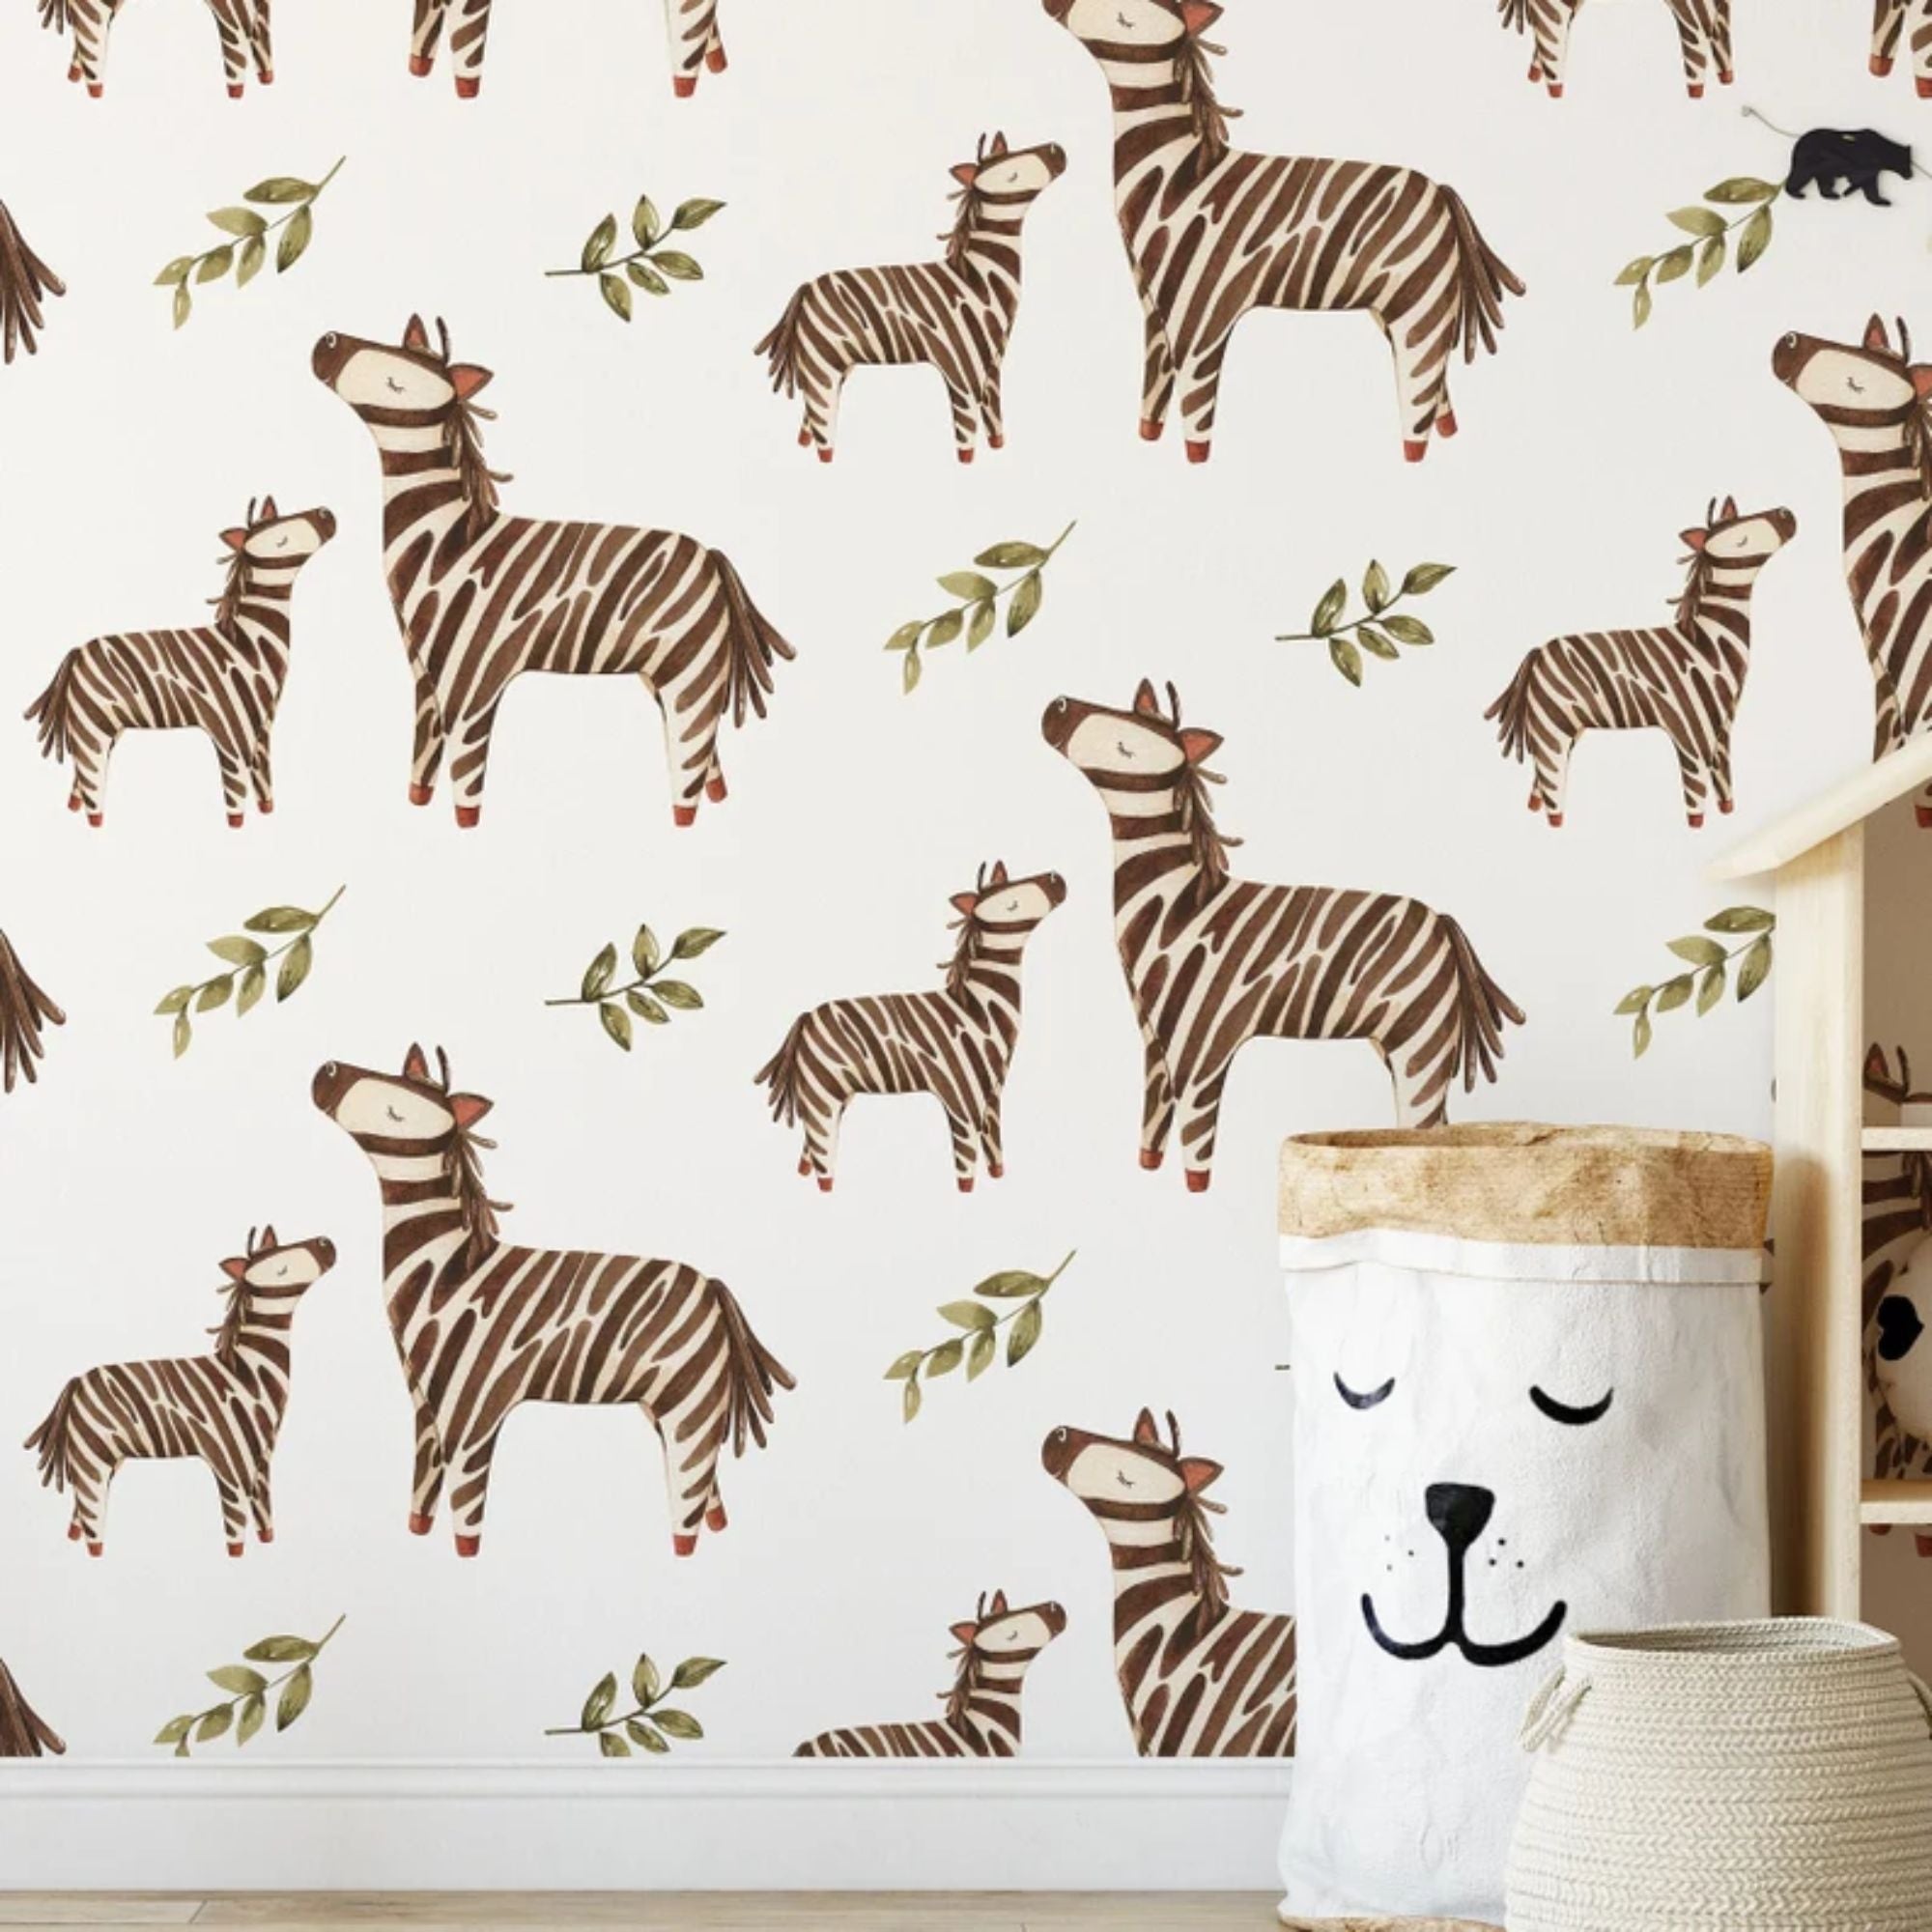 Wall covered with watercolor zebra wallpaper in a kid's room setting, showcasing matching decor